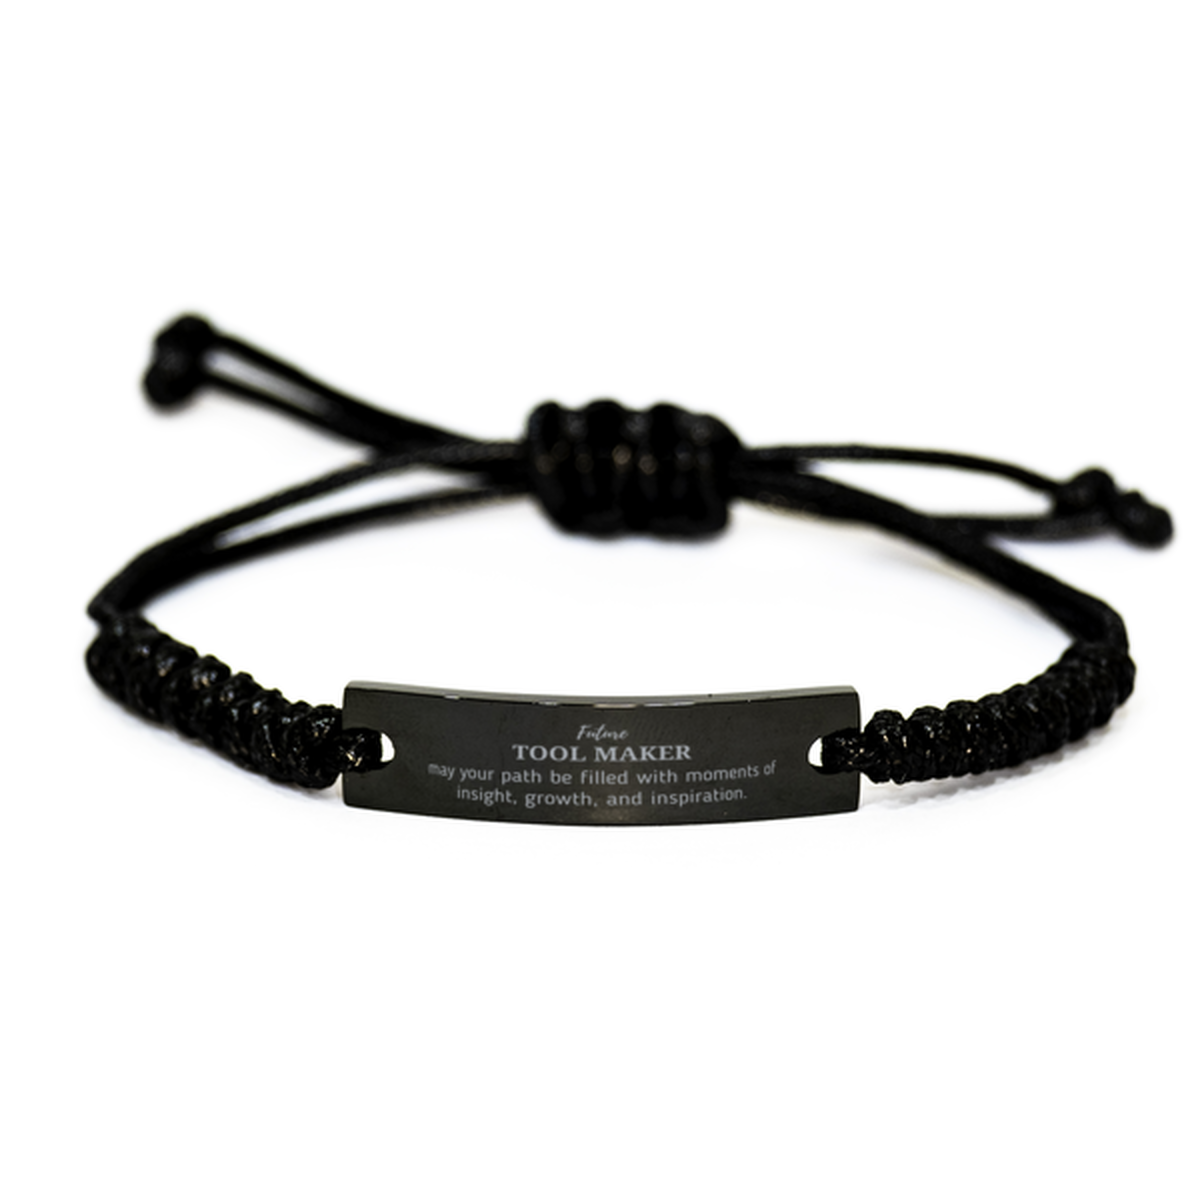 Future Tool Maker Gifts, May your path be filled with moments of insight, Graduation Gifts for New Tool Maker, Christmas Unique Black Rope Bracelet For Men, Women, Friends